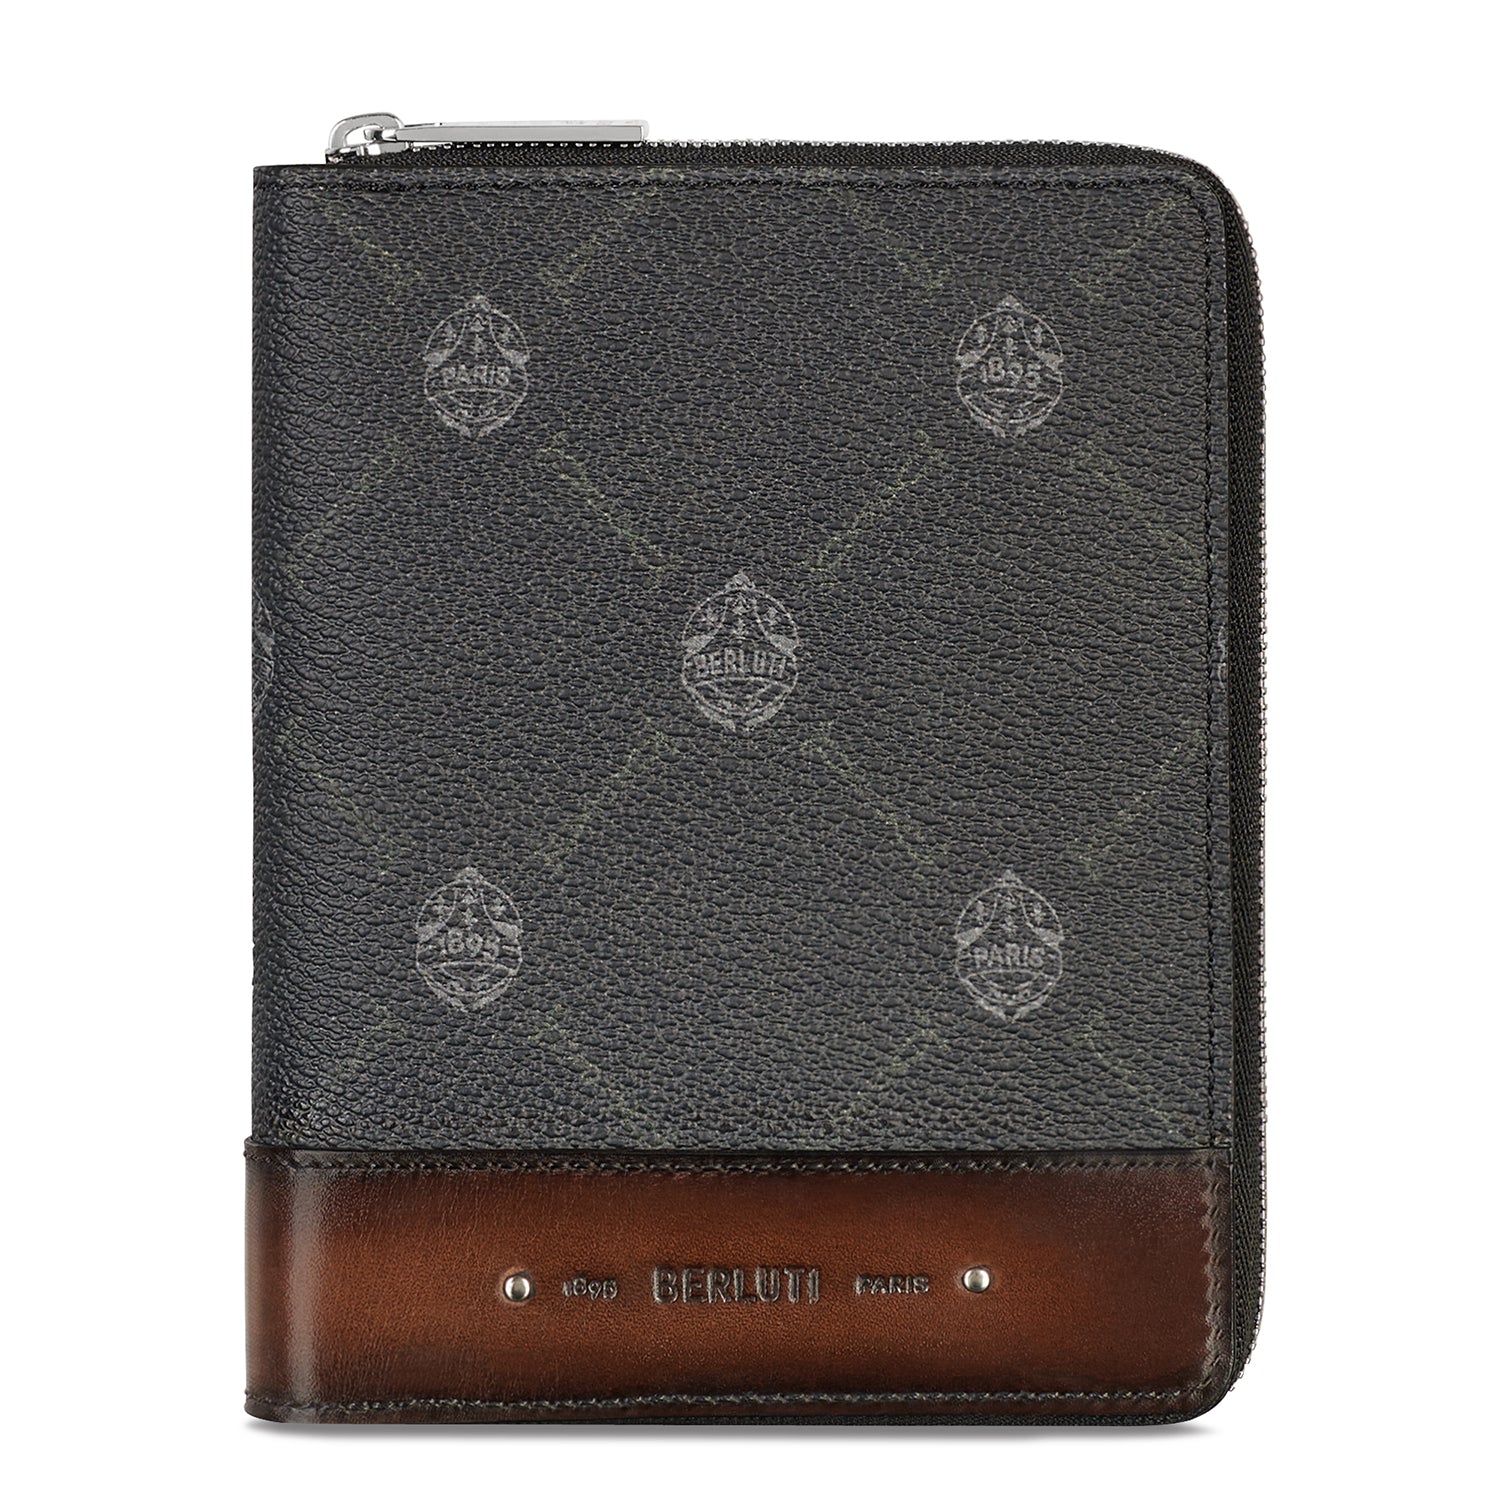 Expedition SIGNATURE Canvas Zipped Wallet